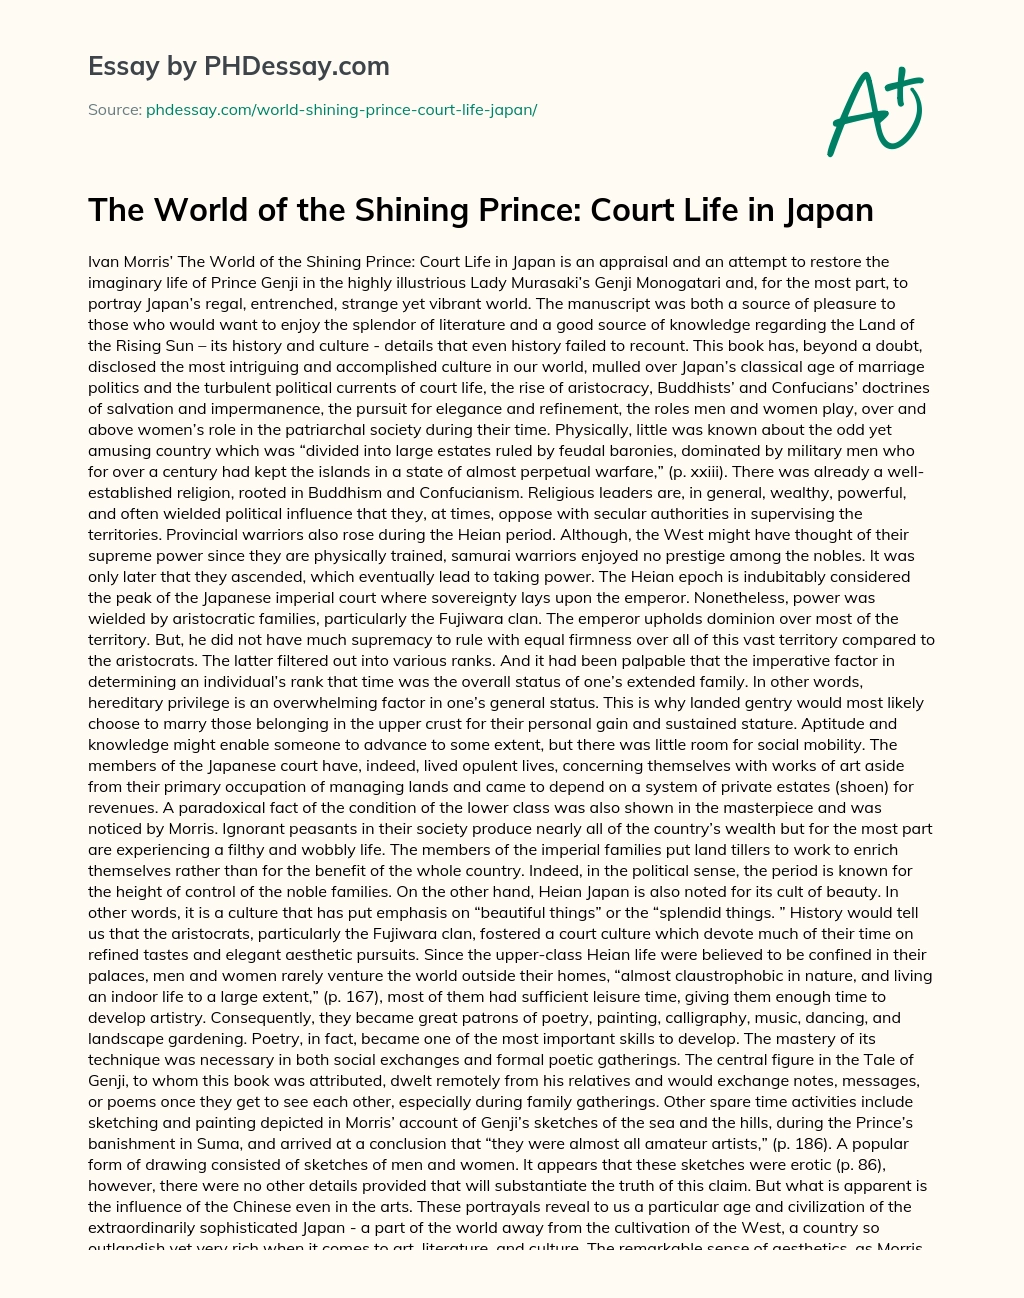 The World of the Shining Prince: Court Life in Japan essay